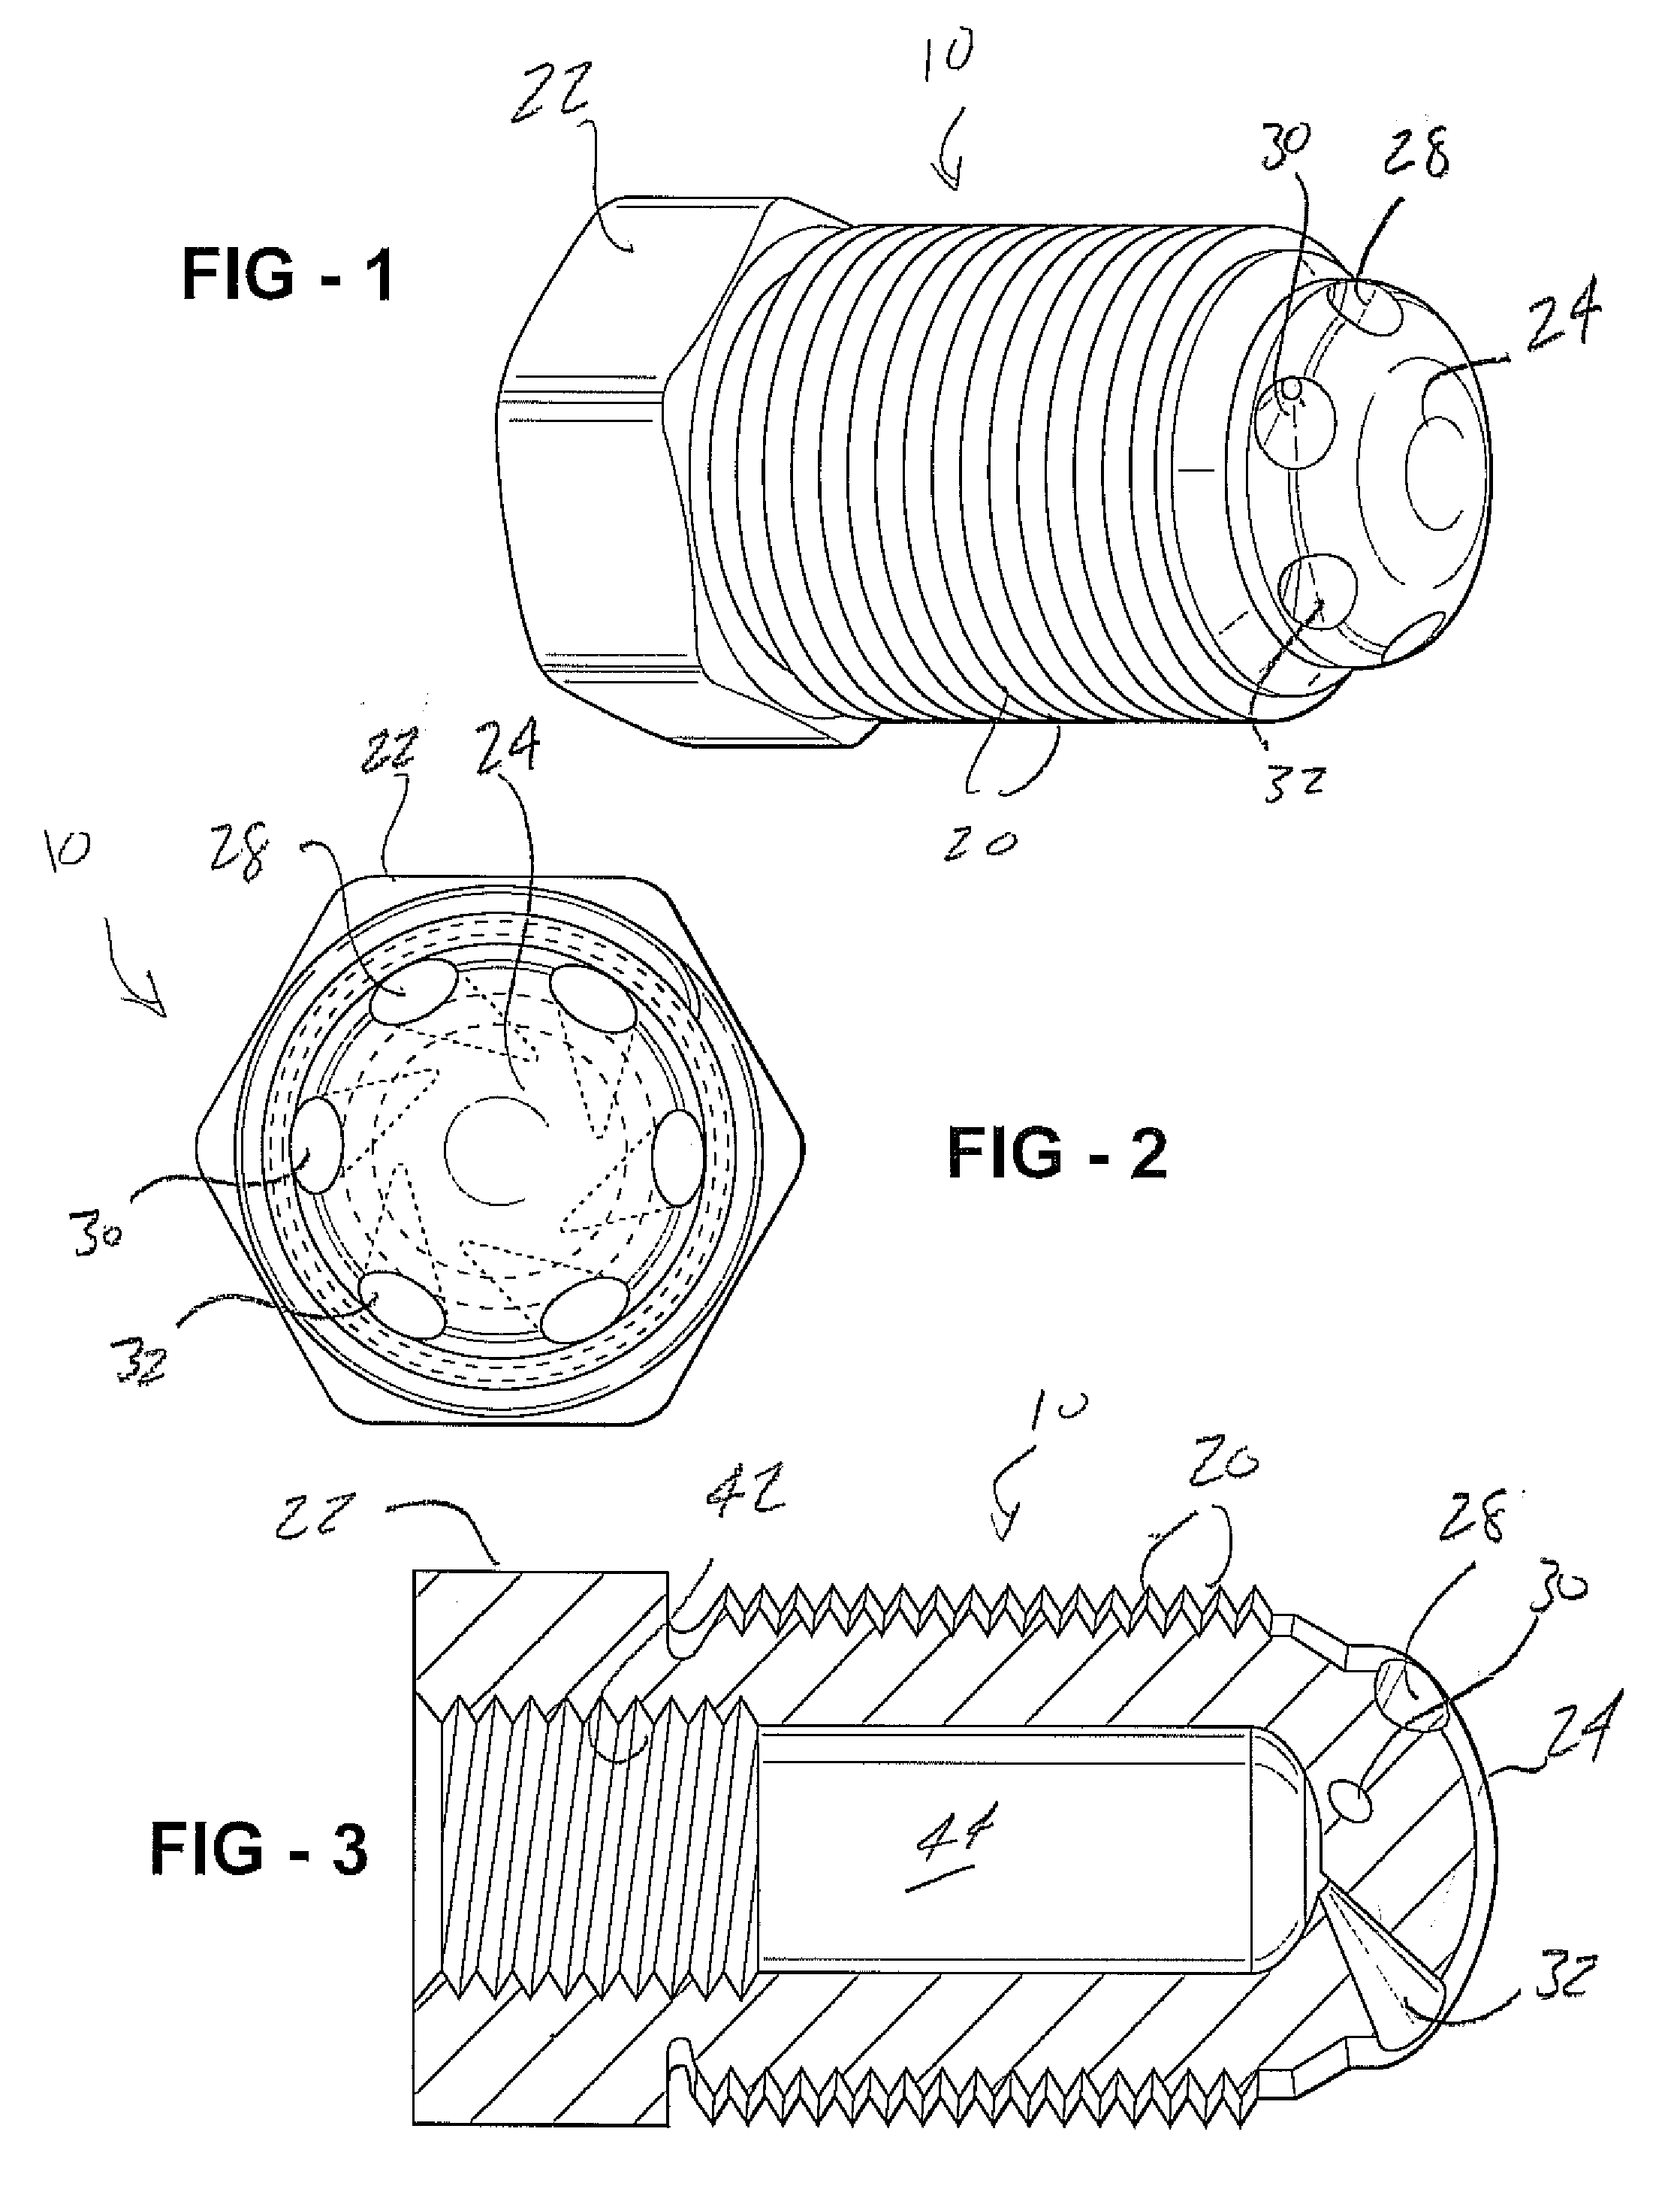 Spark to flame conversion unit, such as employed with an existing spark plug or heat source supplied glow plug for accomplishing more efficient piston combustion